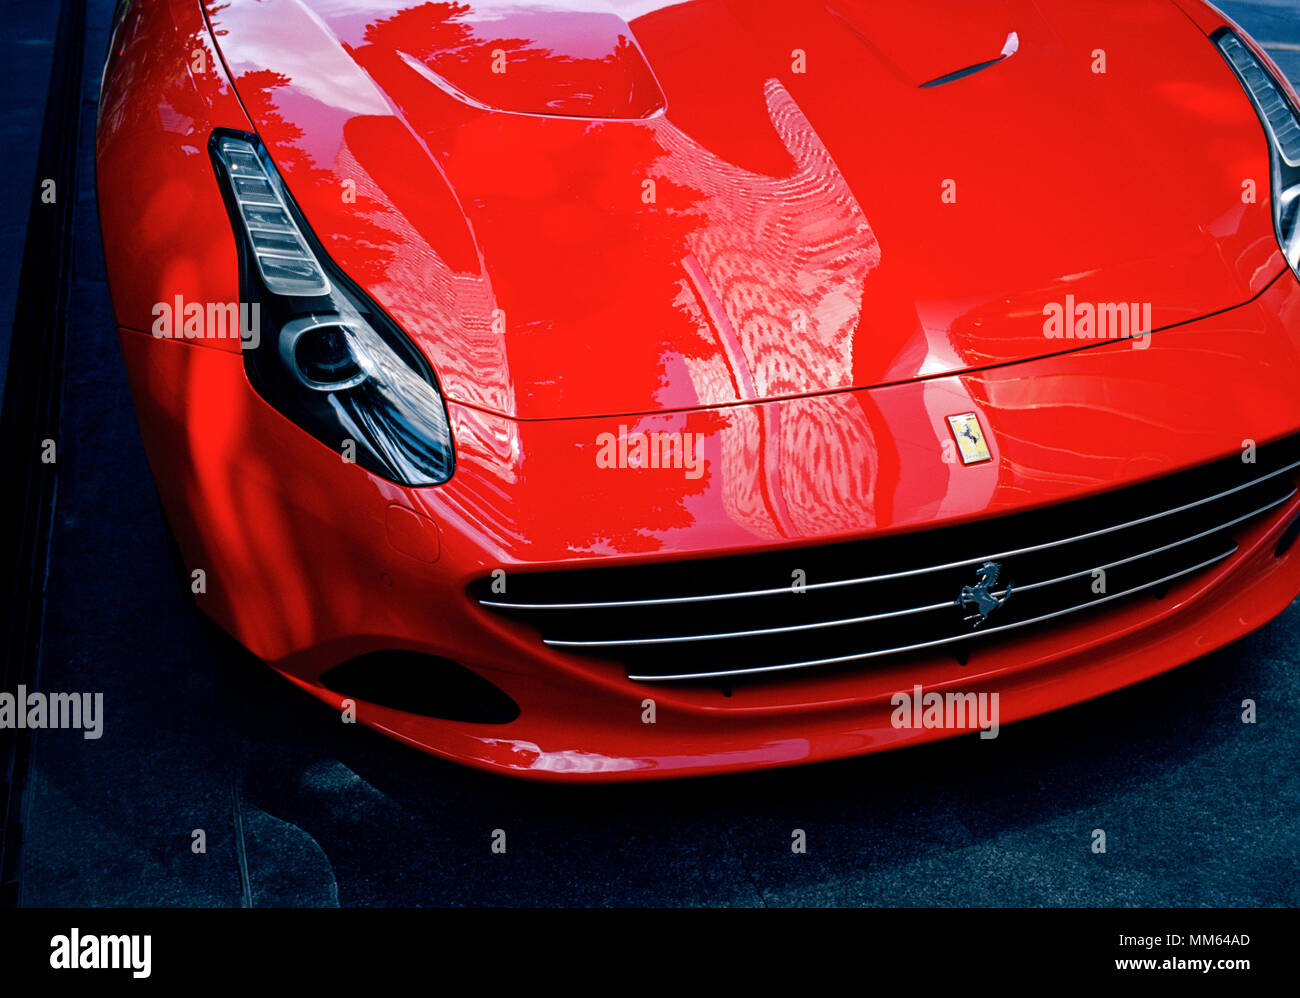 Transport - Classic Super Car - Ferrari in Sukhumvit in Bangkok in Thailand in Southeast Asia Far East. Cars Wealth Wealthy Money Rich Lifestyle Stock Photo